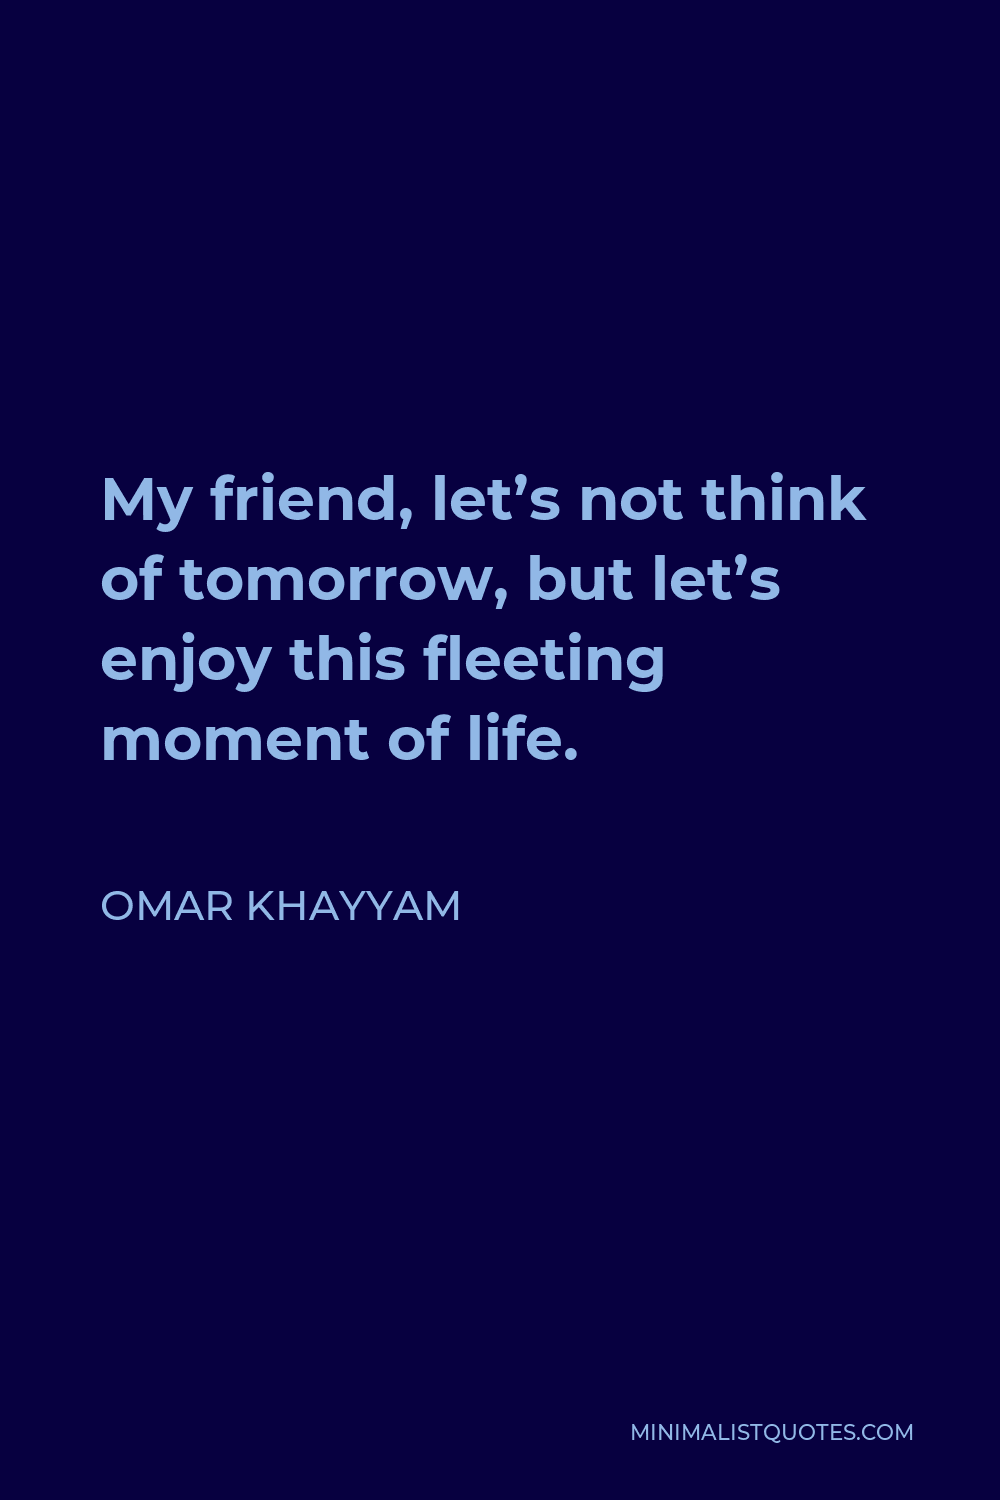 Omar Khayyam Quote - My friend, let’s not think of tomorrow, but let’s enjoy this fleeting moment of life.